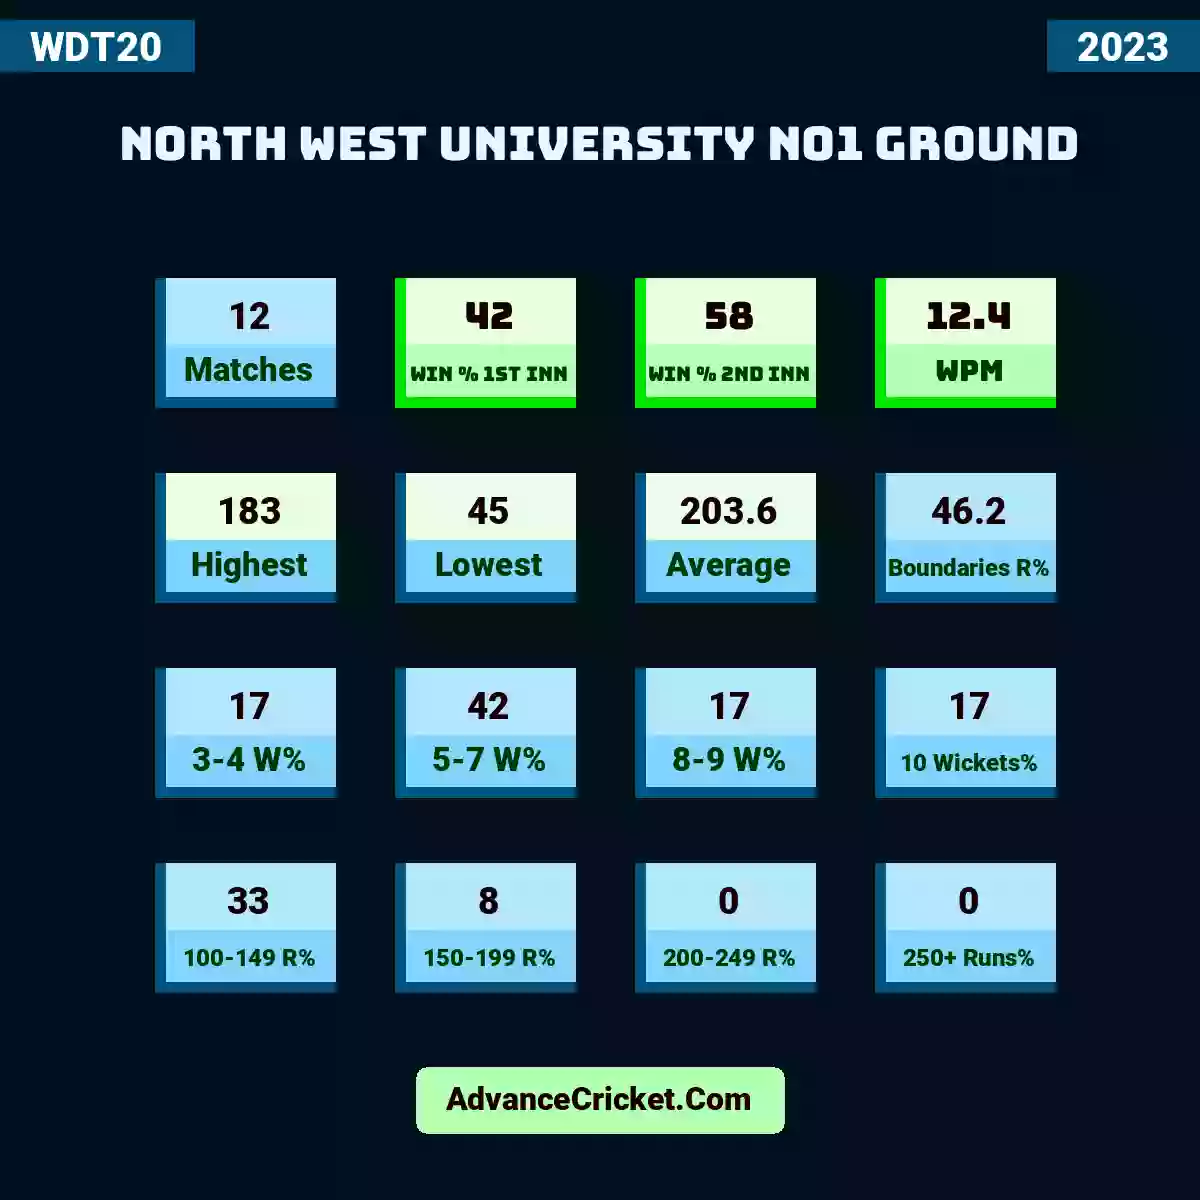 Image showing North West University No1 Ground with Matches: 12, Win % 1st Inn: 42, Win % 2nd Inn: 58, WPM: 12.4, Highest: 183, Lowest: 45, Average: 203.6, Boundaries R%: 46.2, 3-4 W%: 17, 5-7 W%: 42, 8-9 W%: 17, 10 Wickets%: 17, 100-149 R%: 33, 150-199 R%: 8, 200-249 R%: 0, 250+ Runs%: 0.